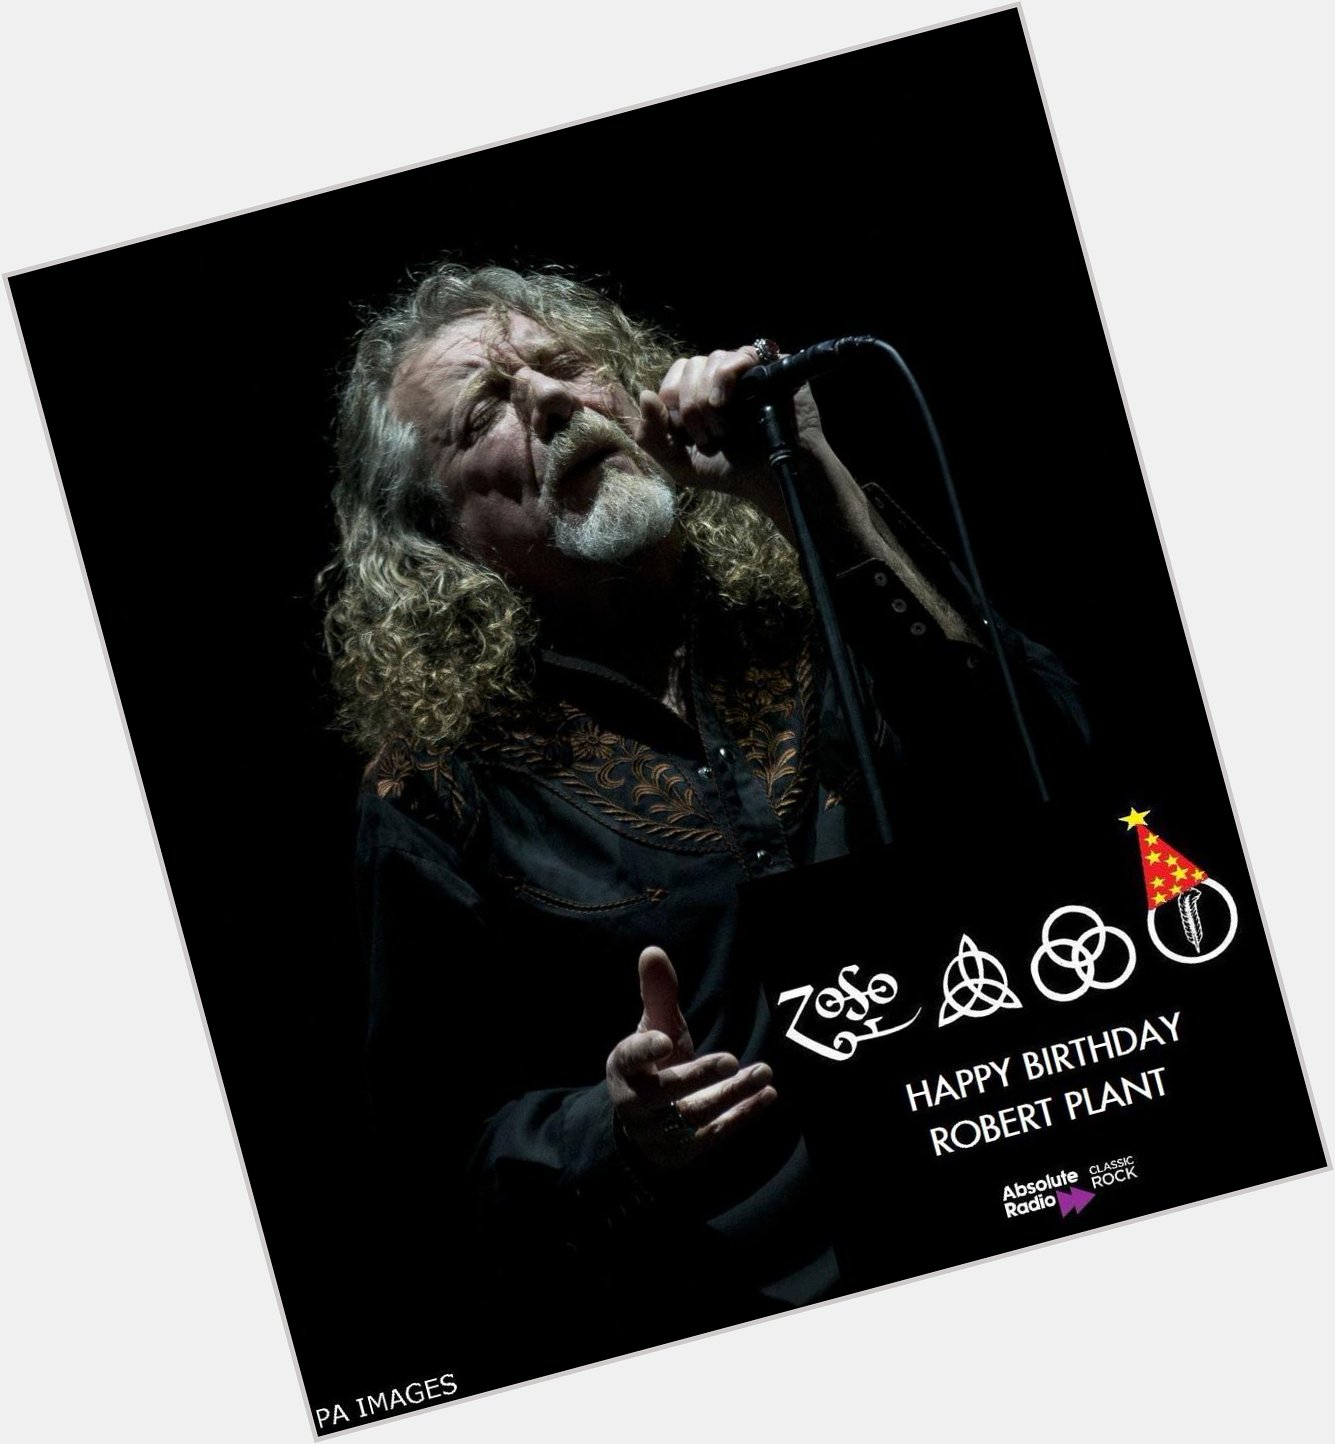 An inspiration is what you are to us...thank you Robert Plant. Happy 67th birthday! 